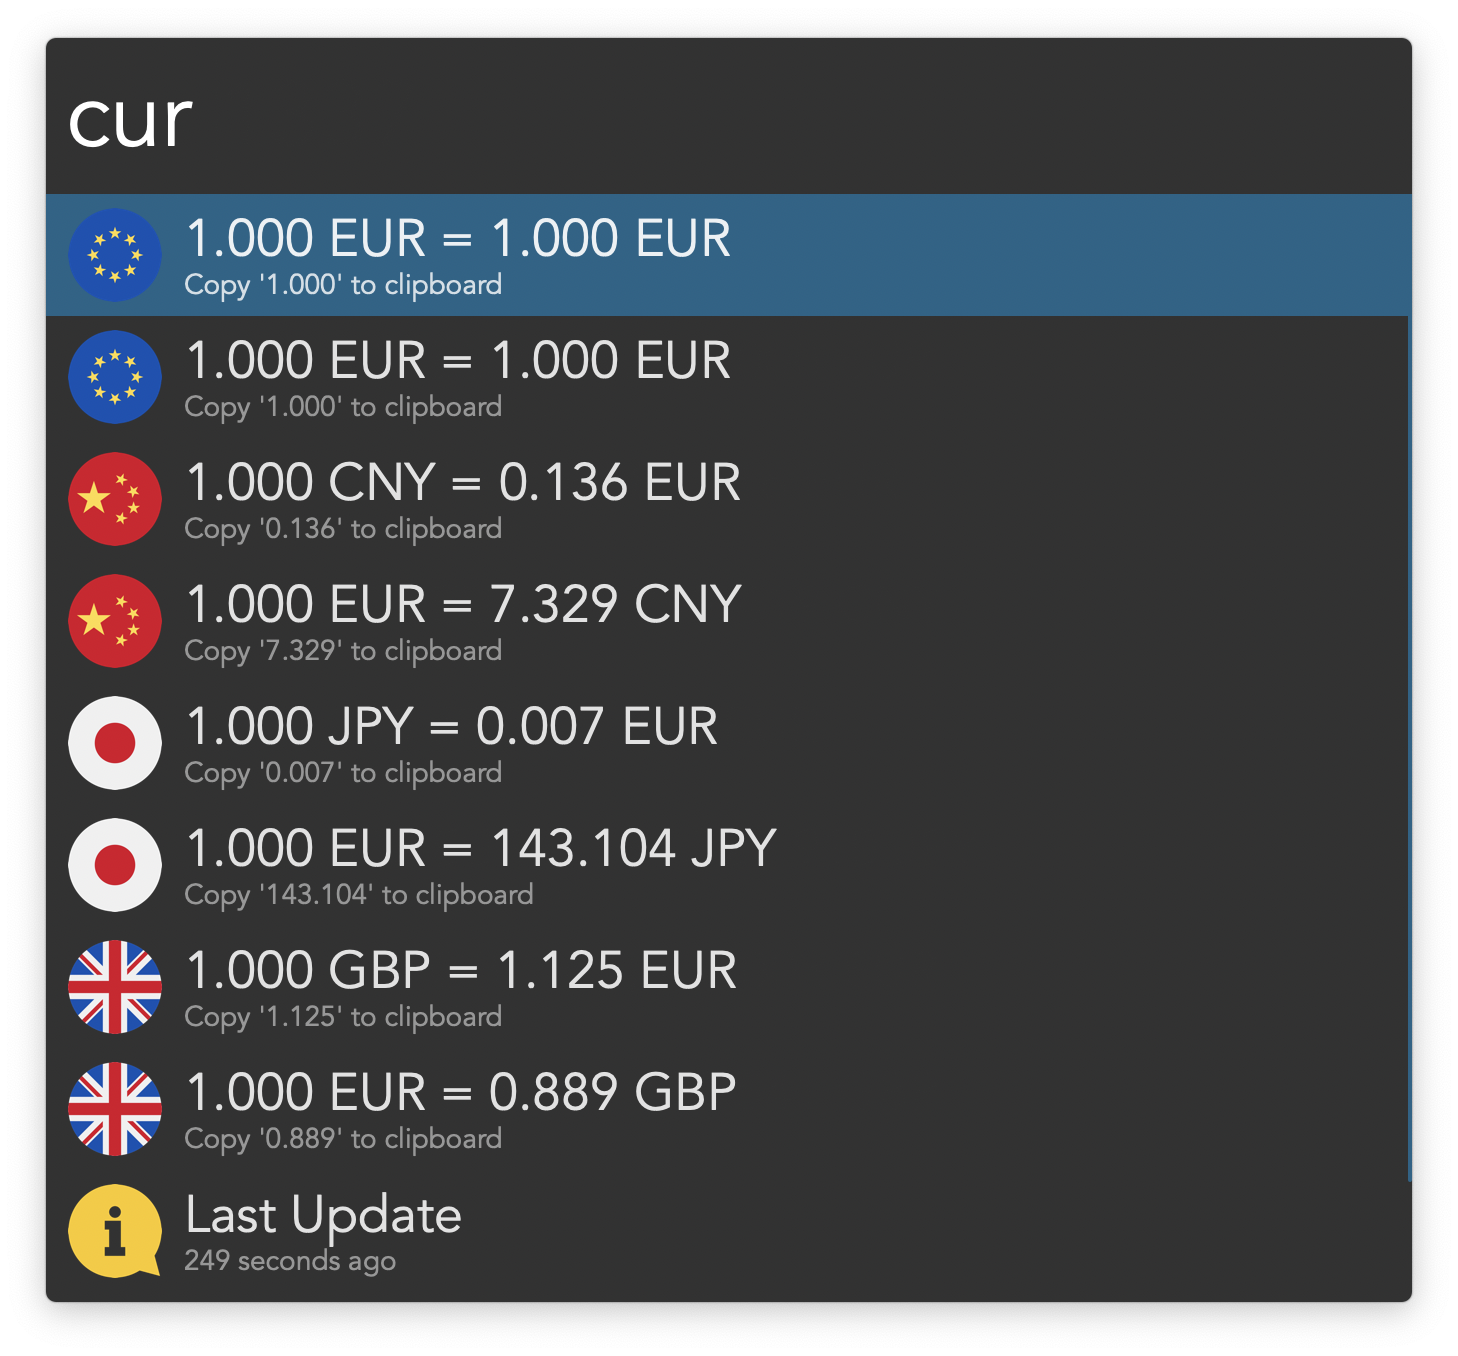 Listing multiple currencies